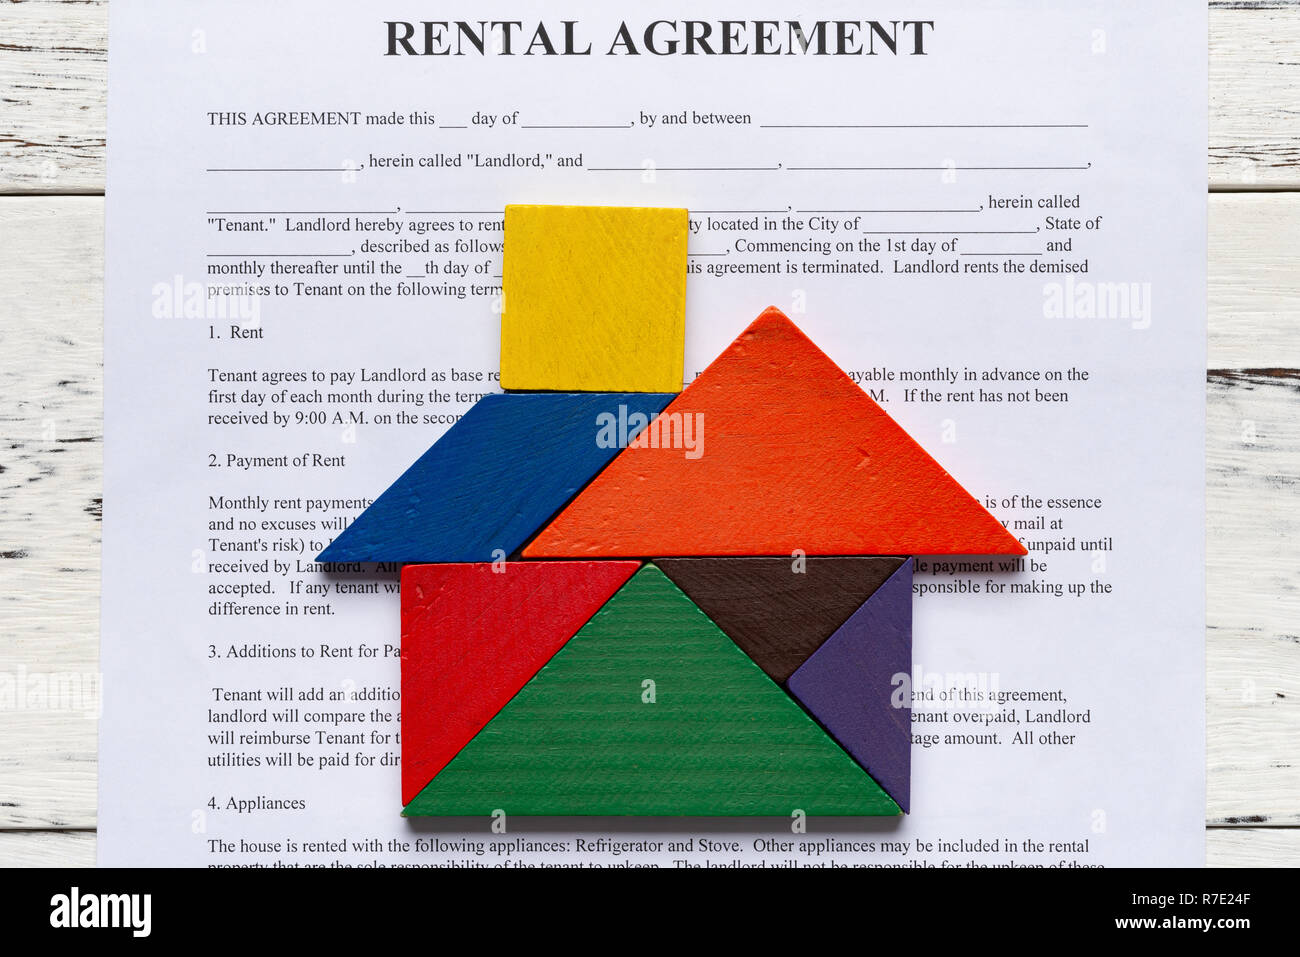 top view rental agreement contact with tangram shaped as a house Stock Photo